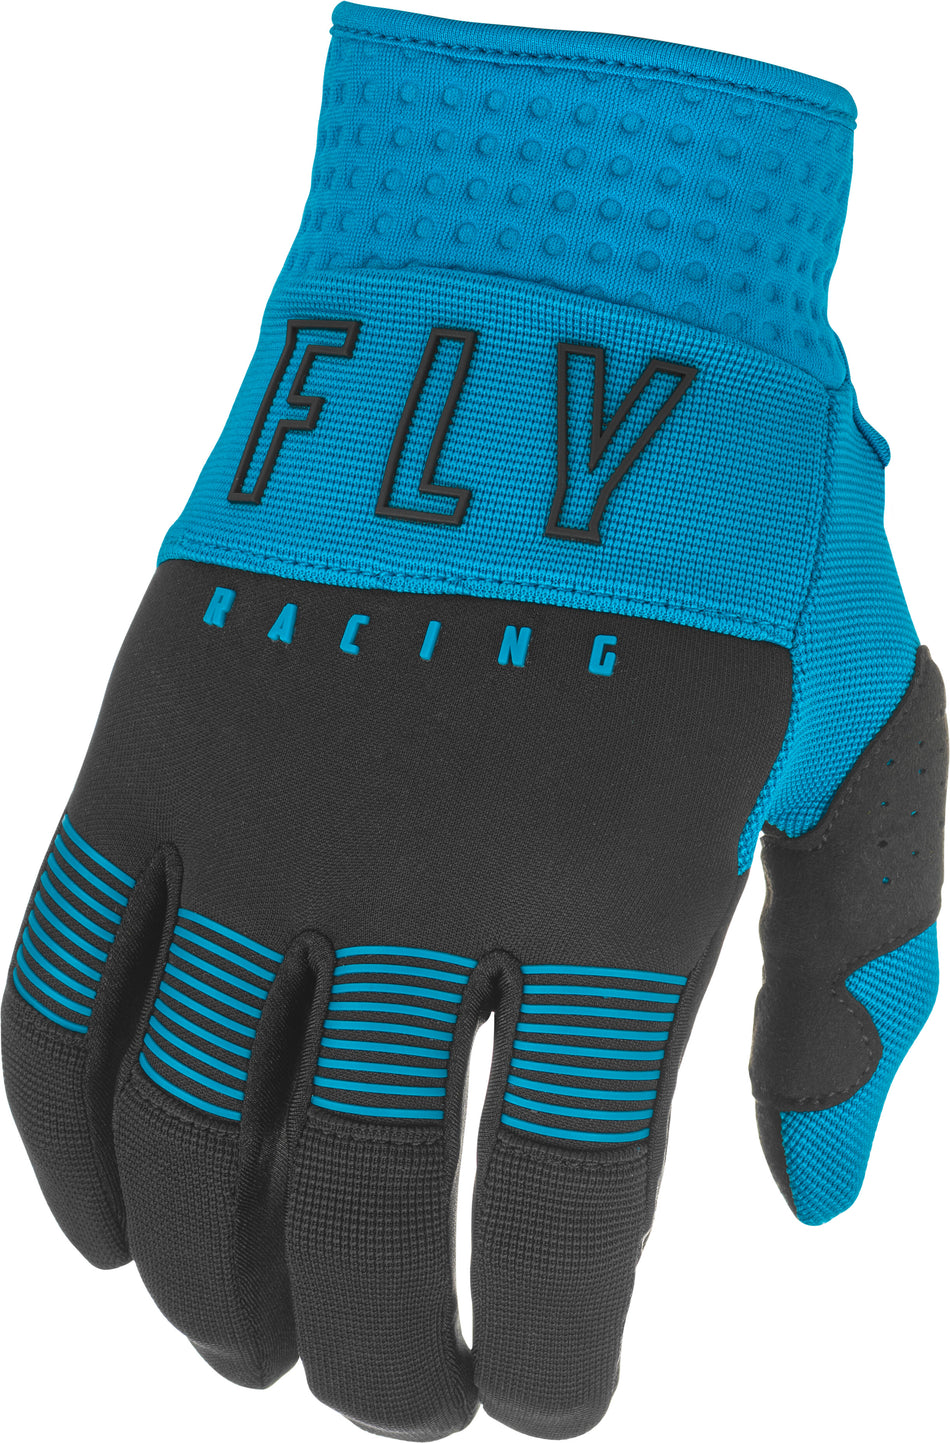 FLY RACING Youth F-16 Gloves Blue/Black Sz 04 374-91104